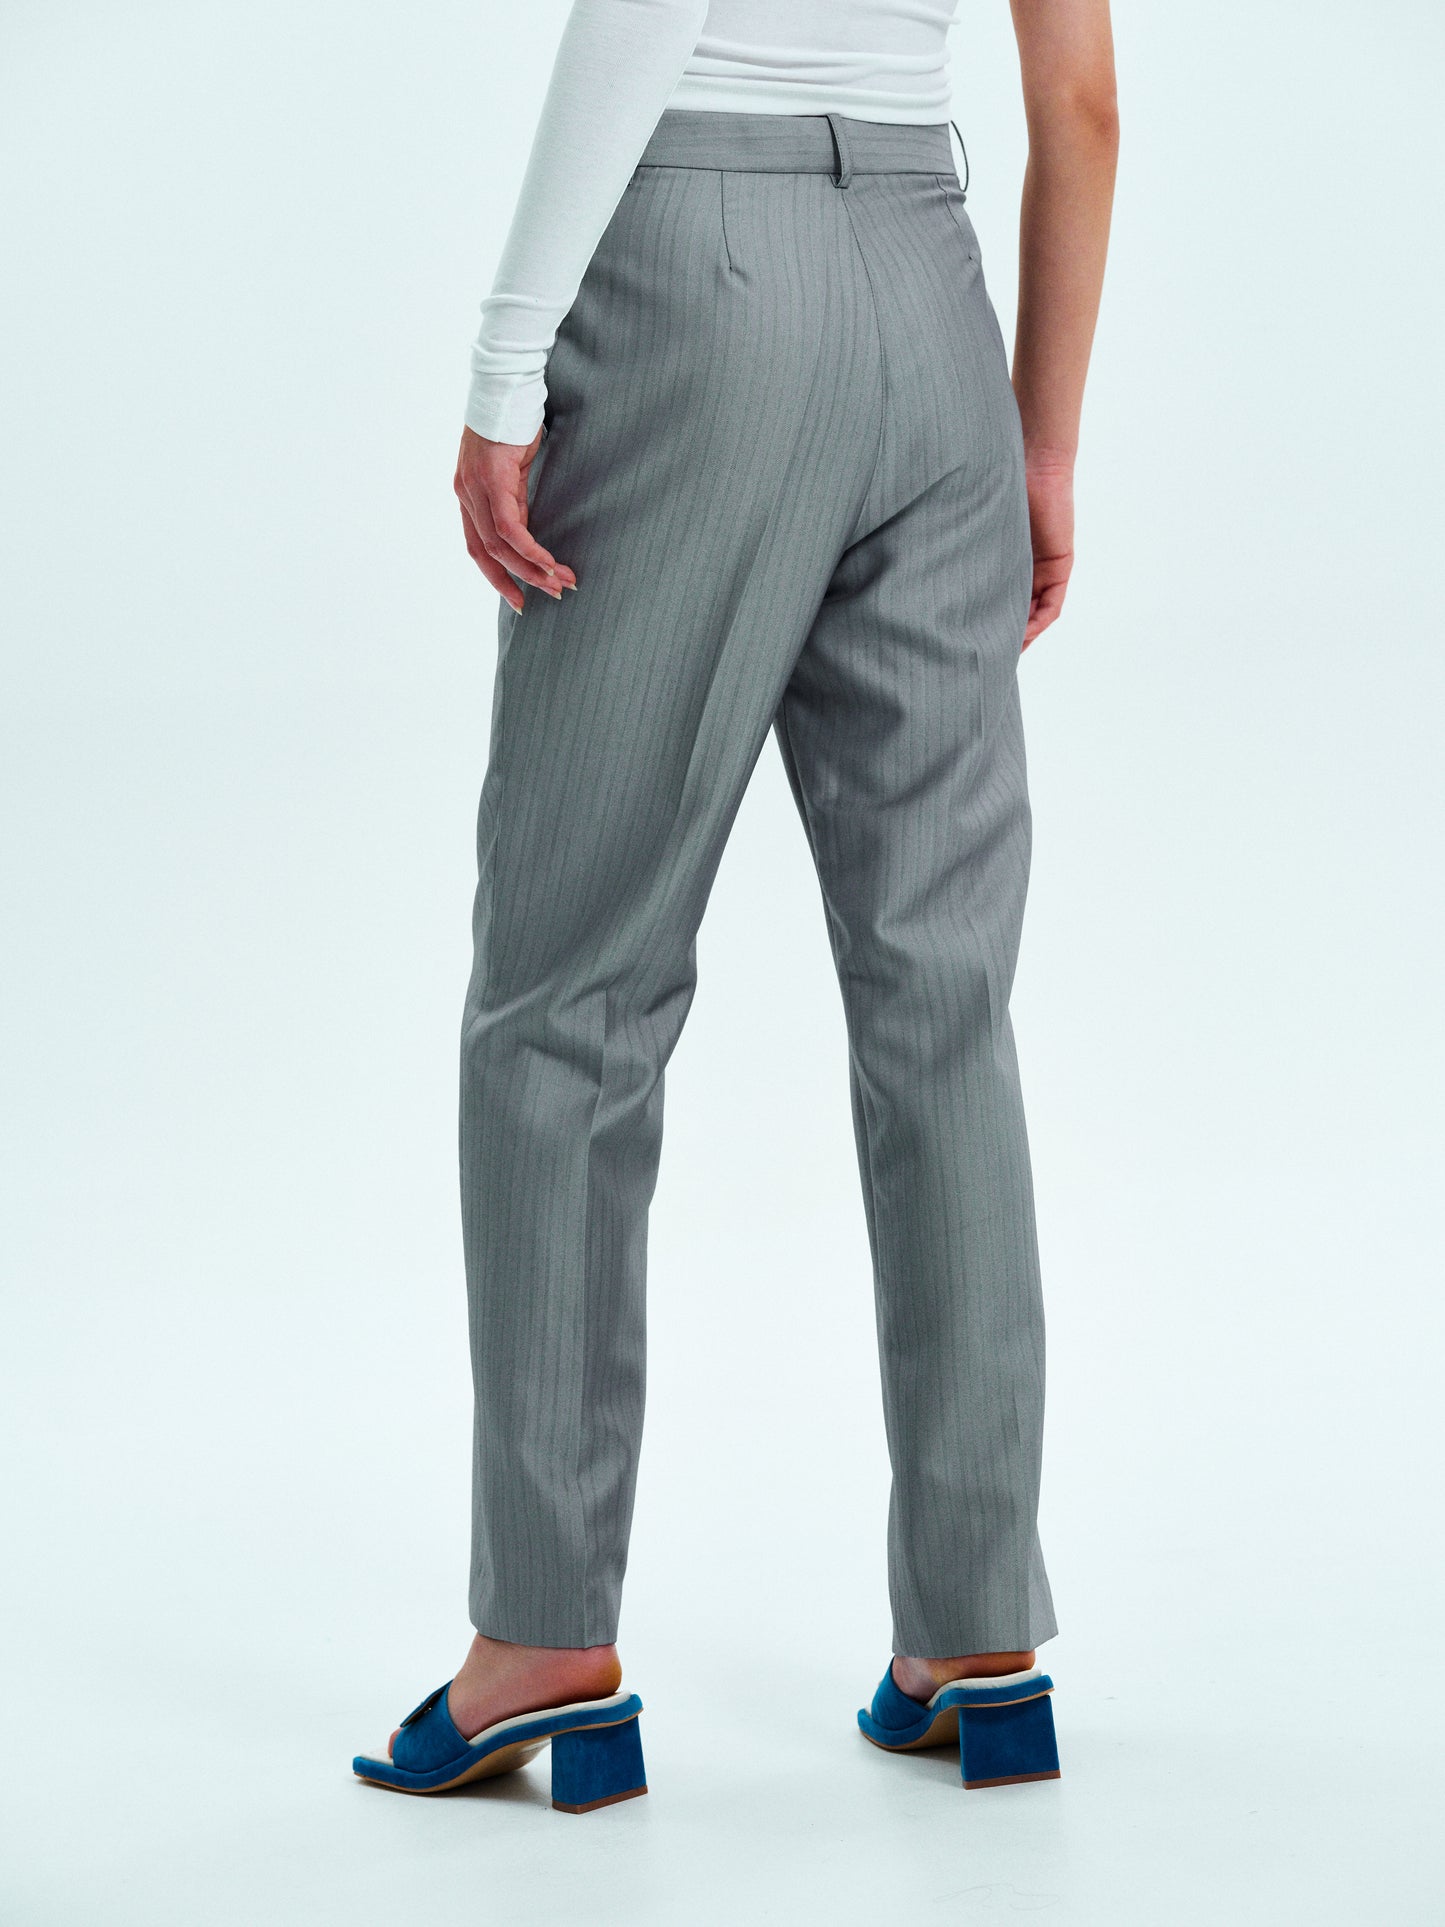 Pinstripe Suit Trousers, Silver Grey